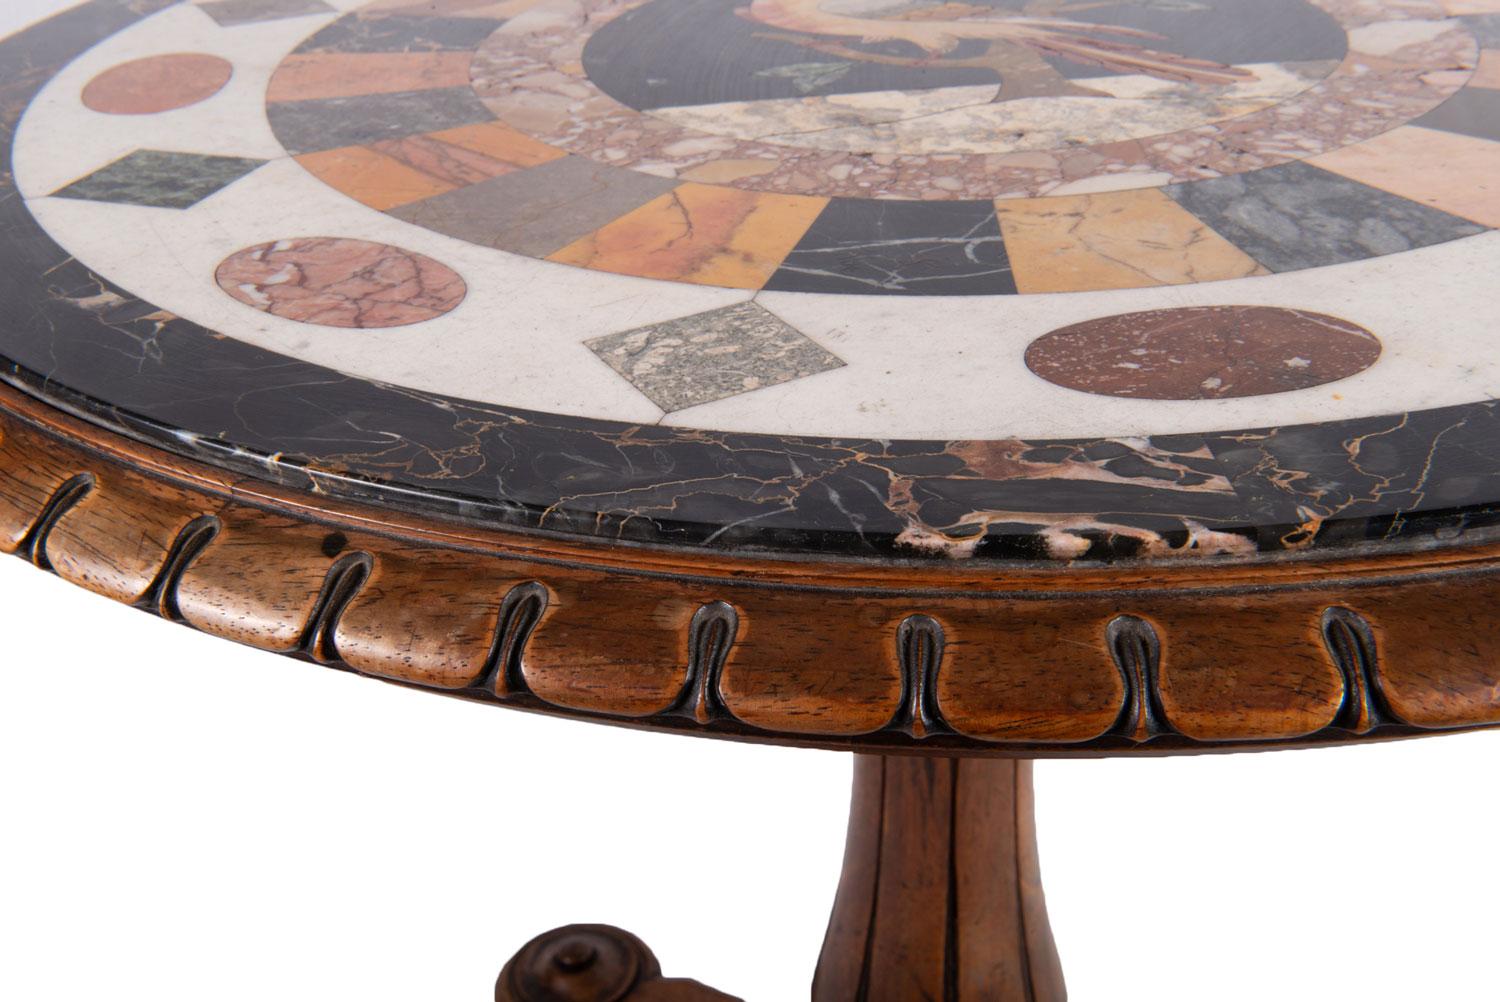 A fine quality 19th century Maltese specimen inlaid marble-top table including portoro, verde antico, giallo di Siena and cipolino, the centre having a Pietro dura panel depicting an exotic parrot on a branch, set into a Mahogany circular top with